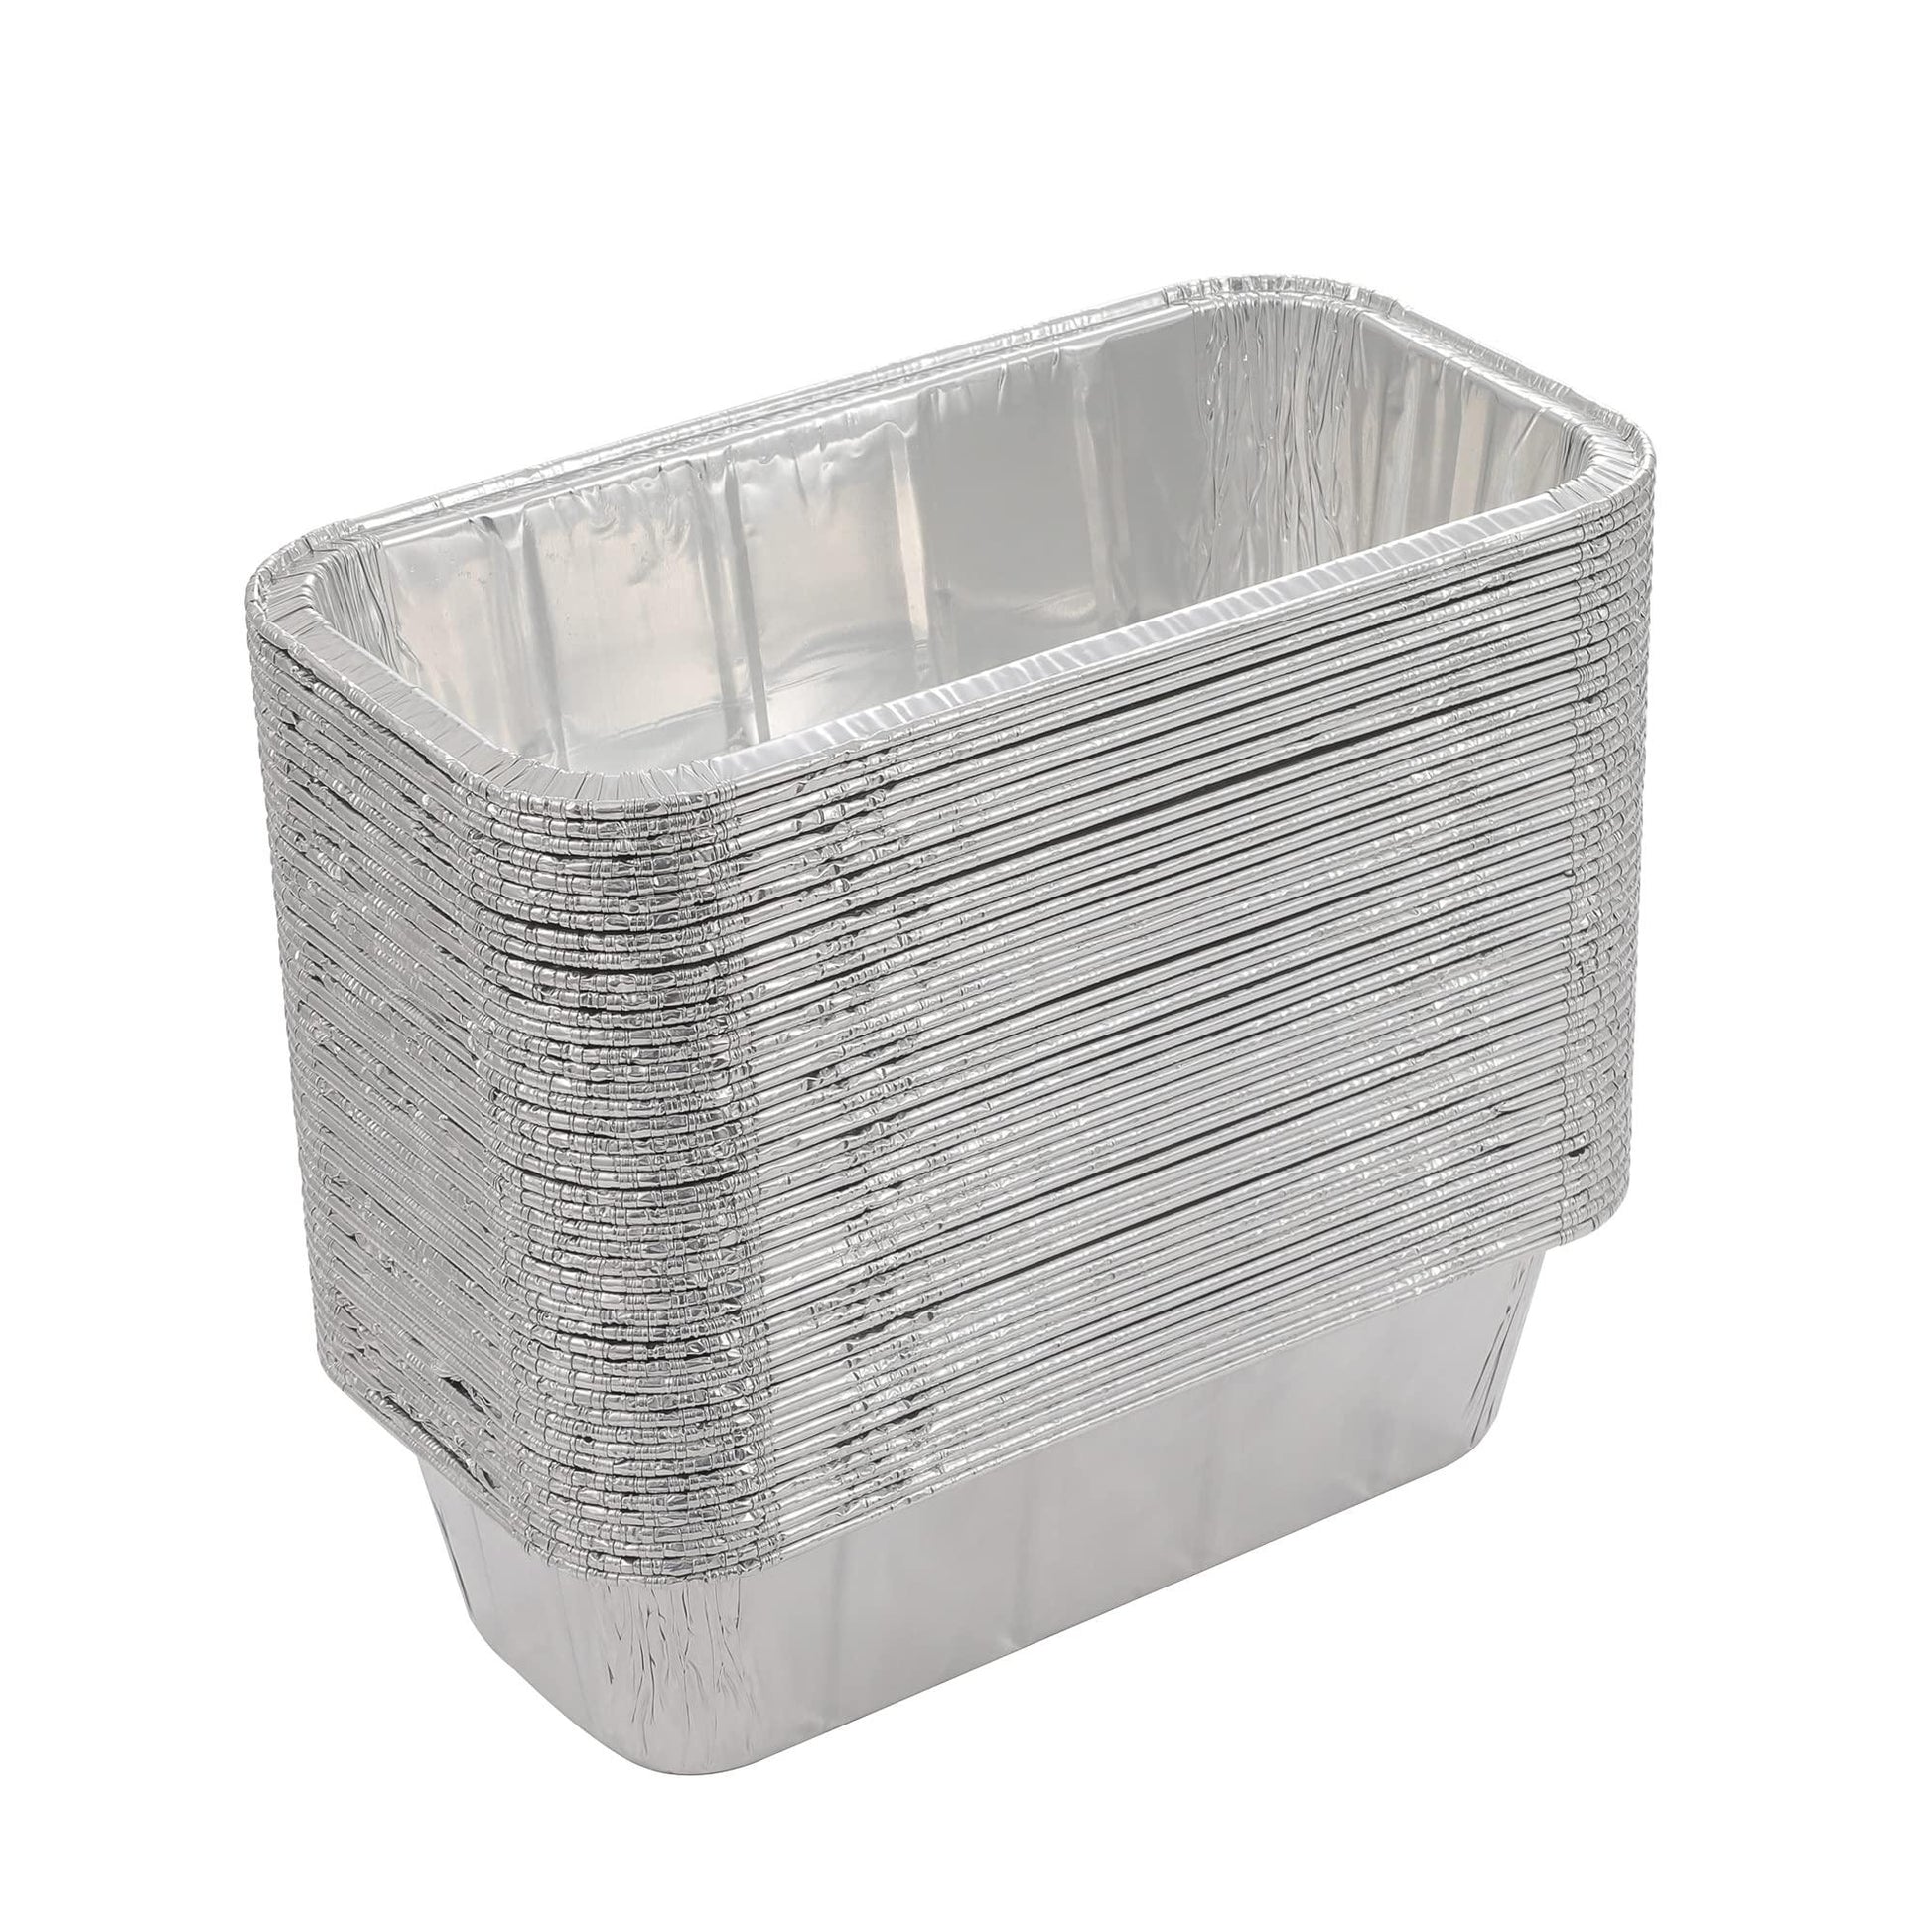 Waytiffer Loaf Pans [50 Pack] 2Lb Heavy Duty Disposable Aluminum Foil Premium Bread Tins Standard Size - 8.5" X 4.5" X 2.5" Perfect for Homemade Cakes & Breads - CookCave